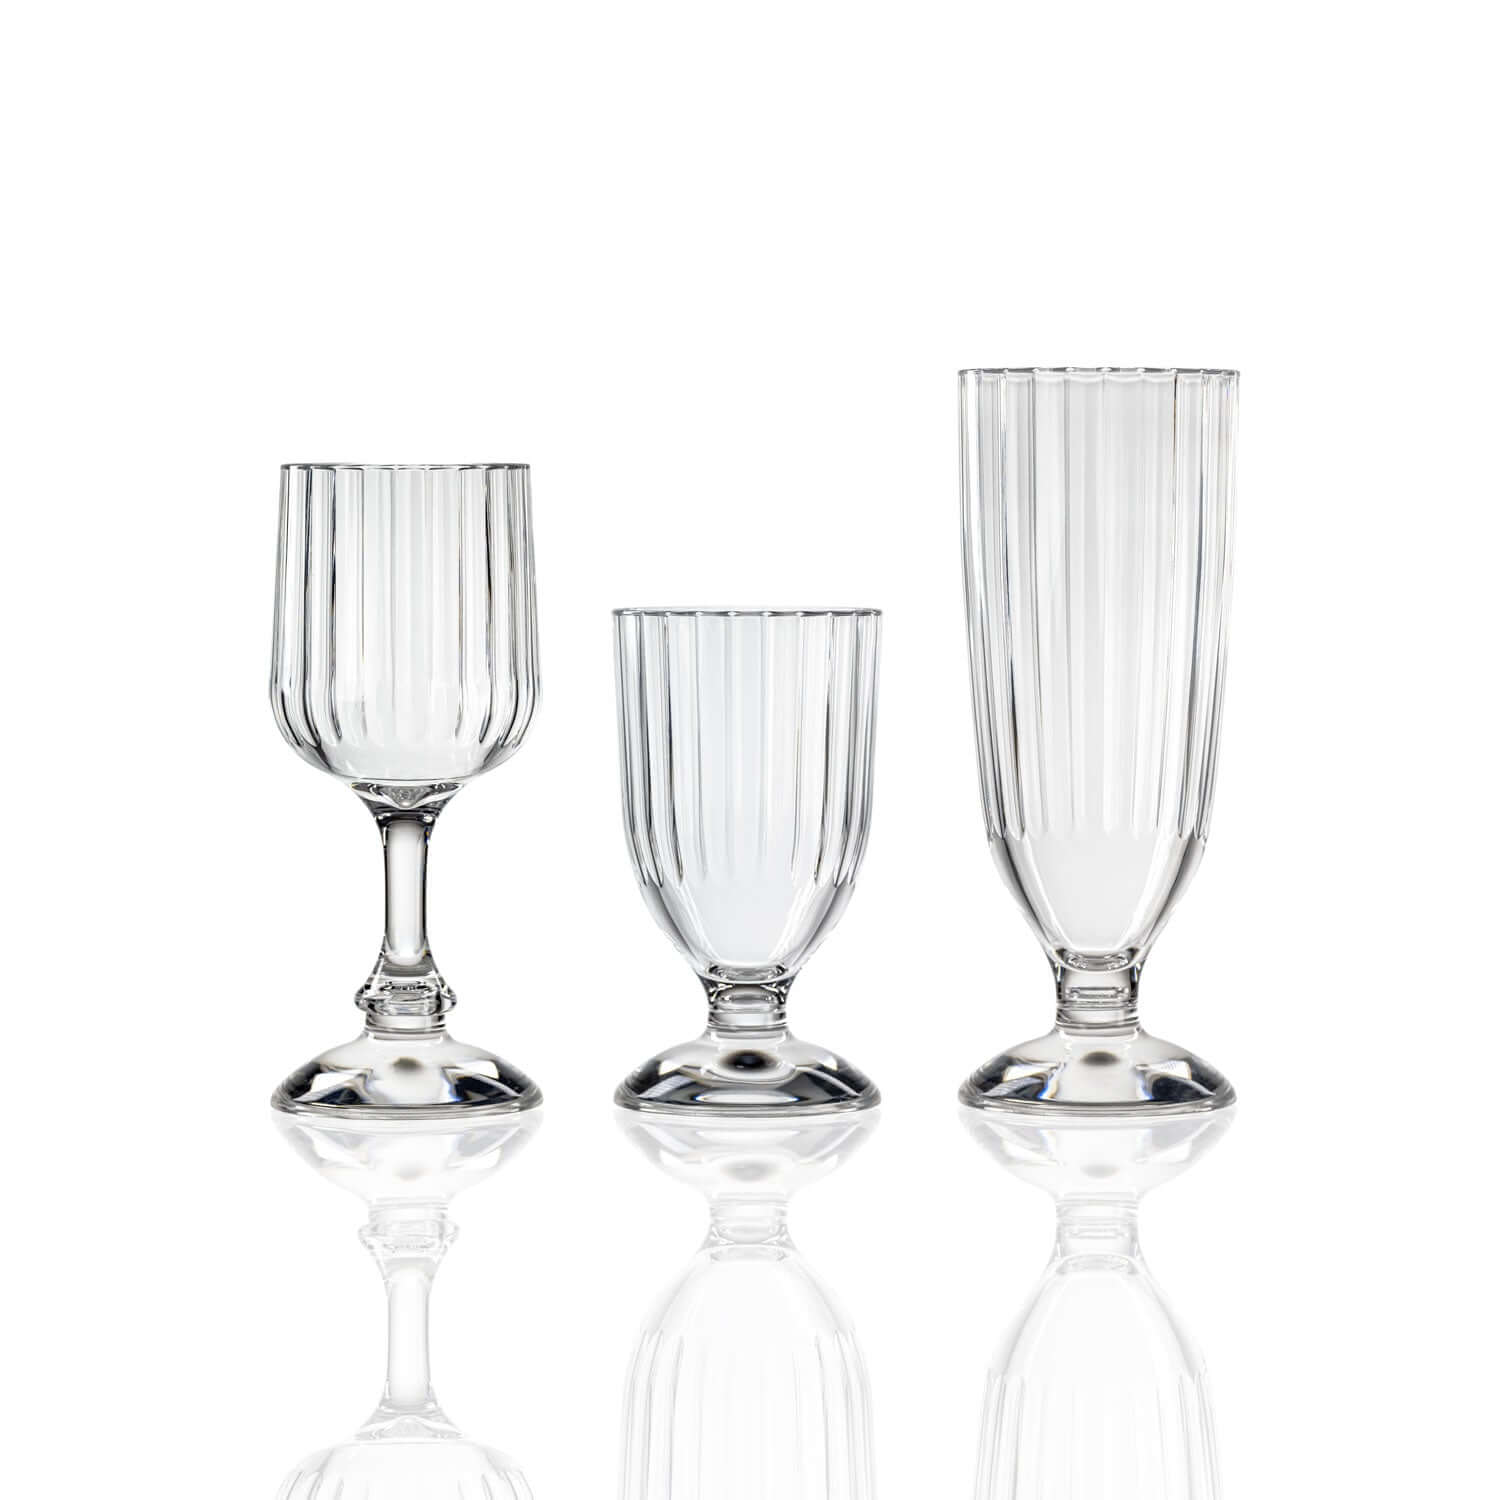 Merritt Designs Imperial Acrylic Drinkware Collection